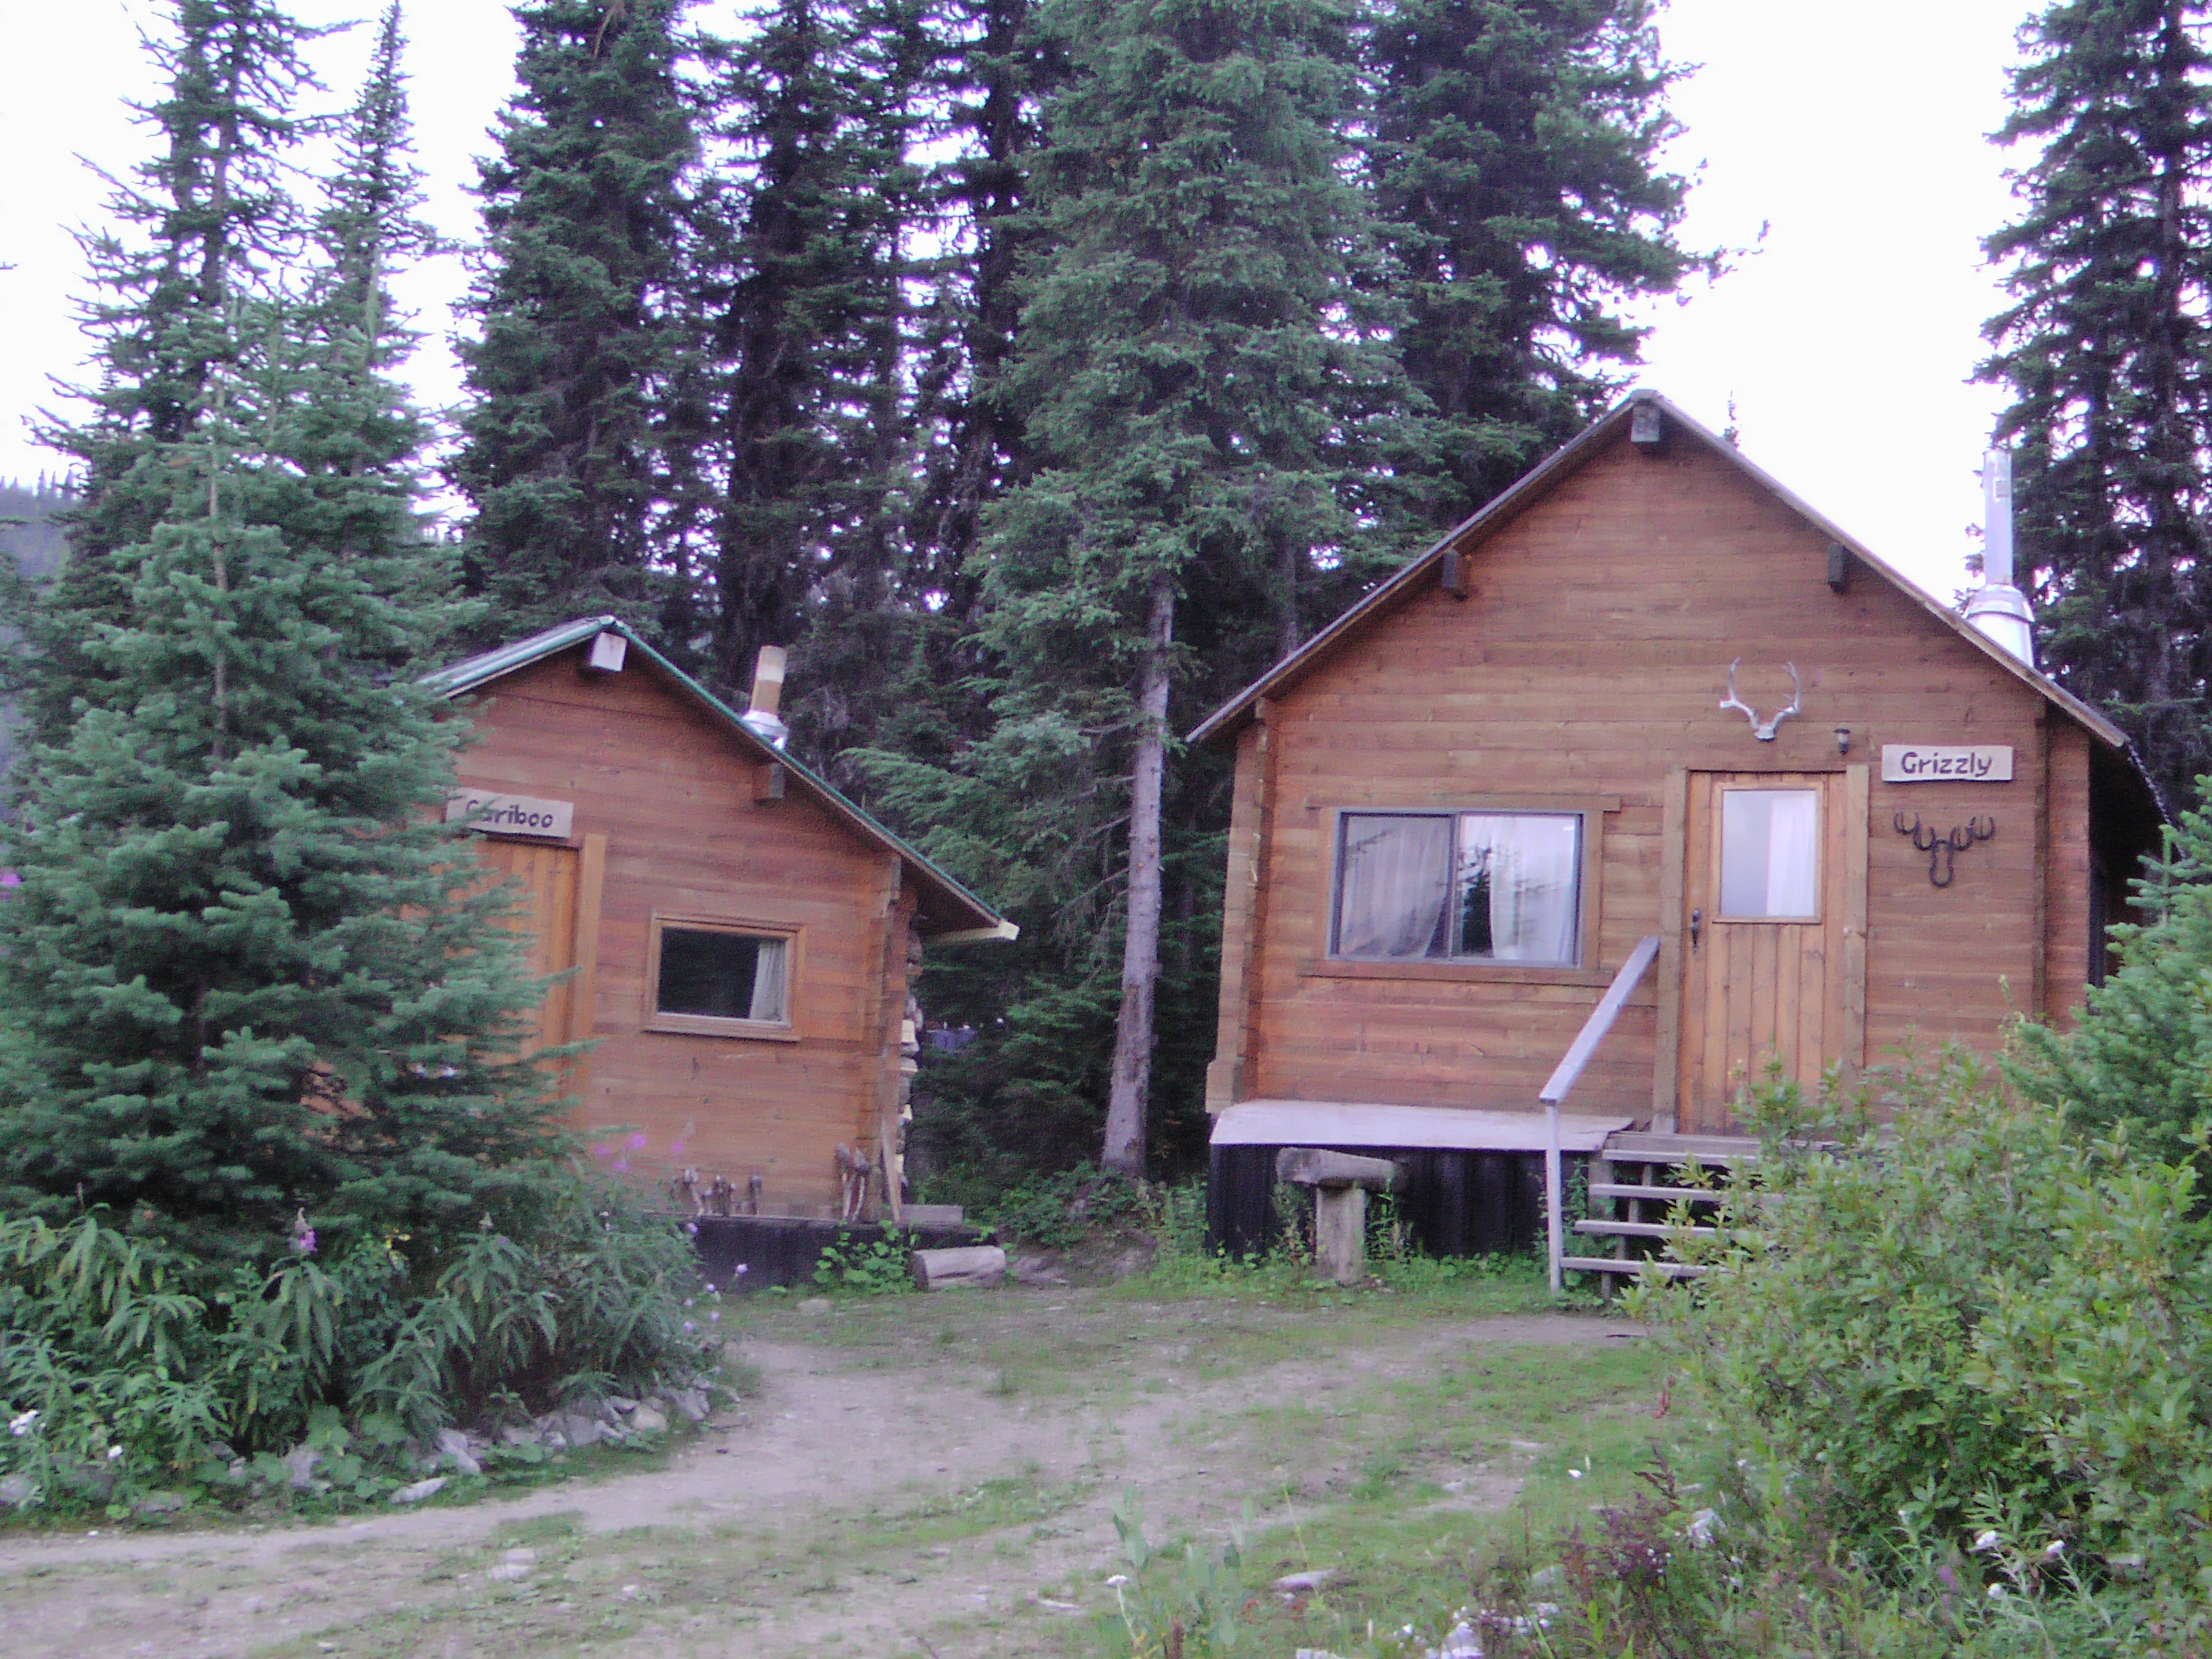 Cariboo and Grizzly Cabins